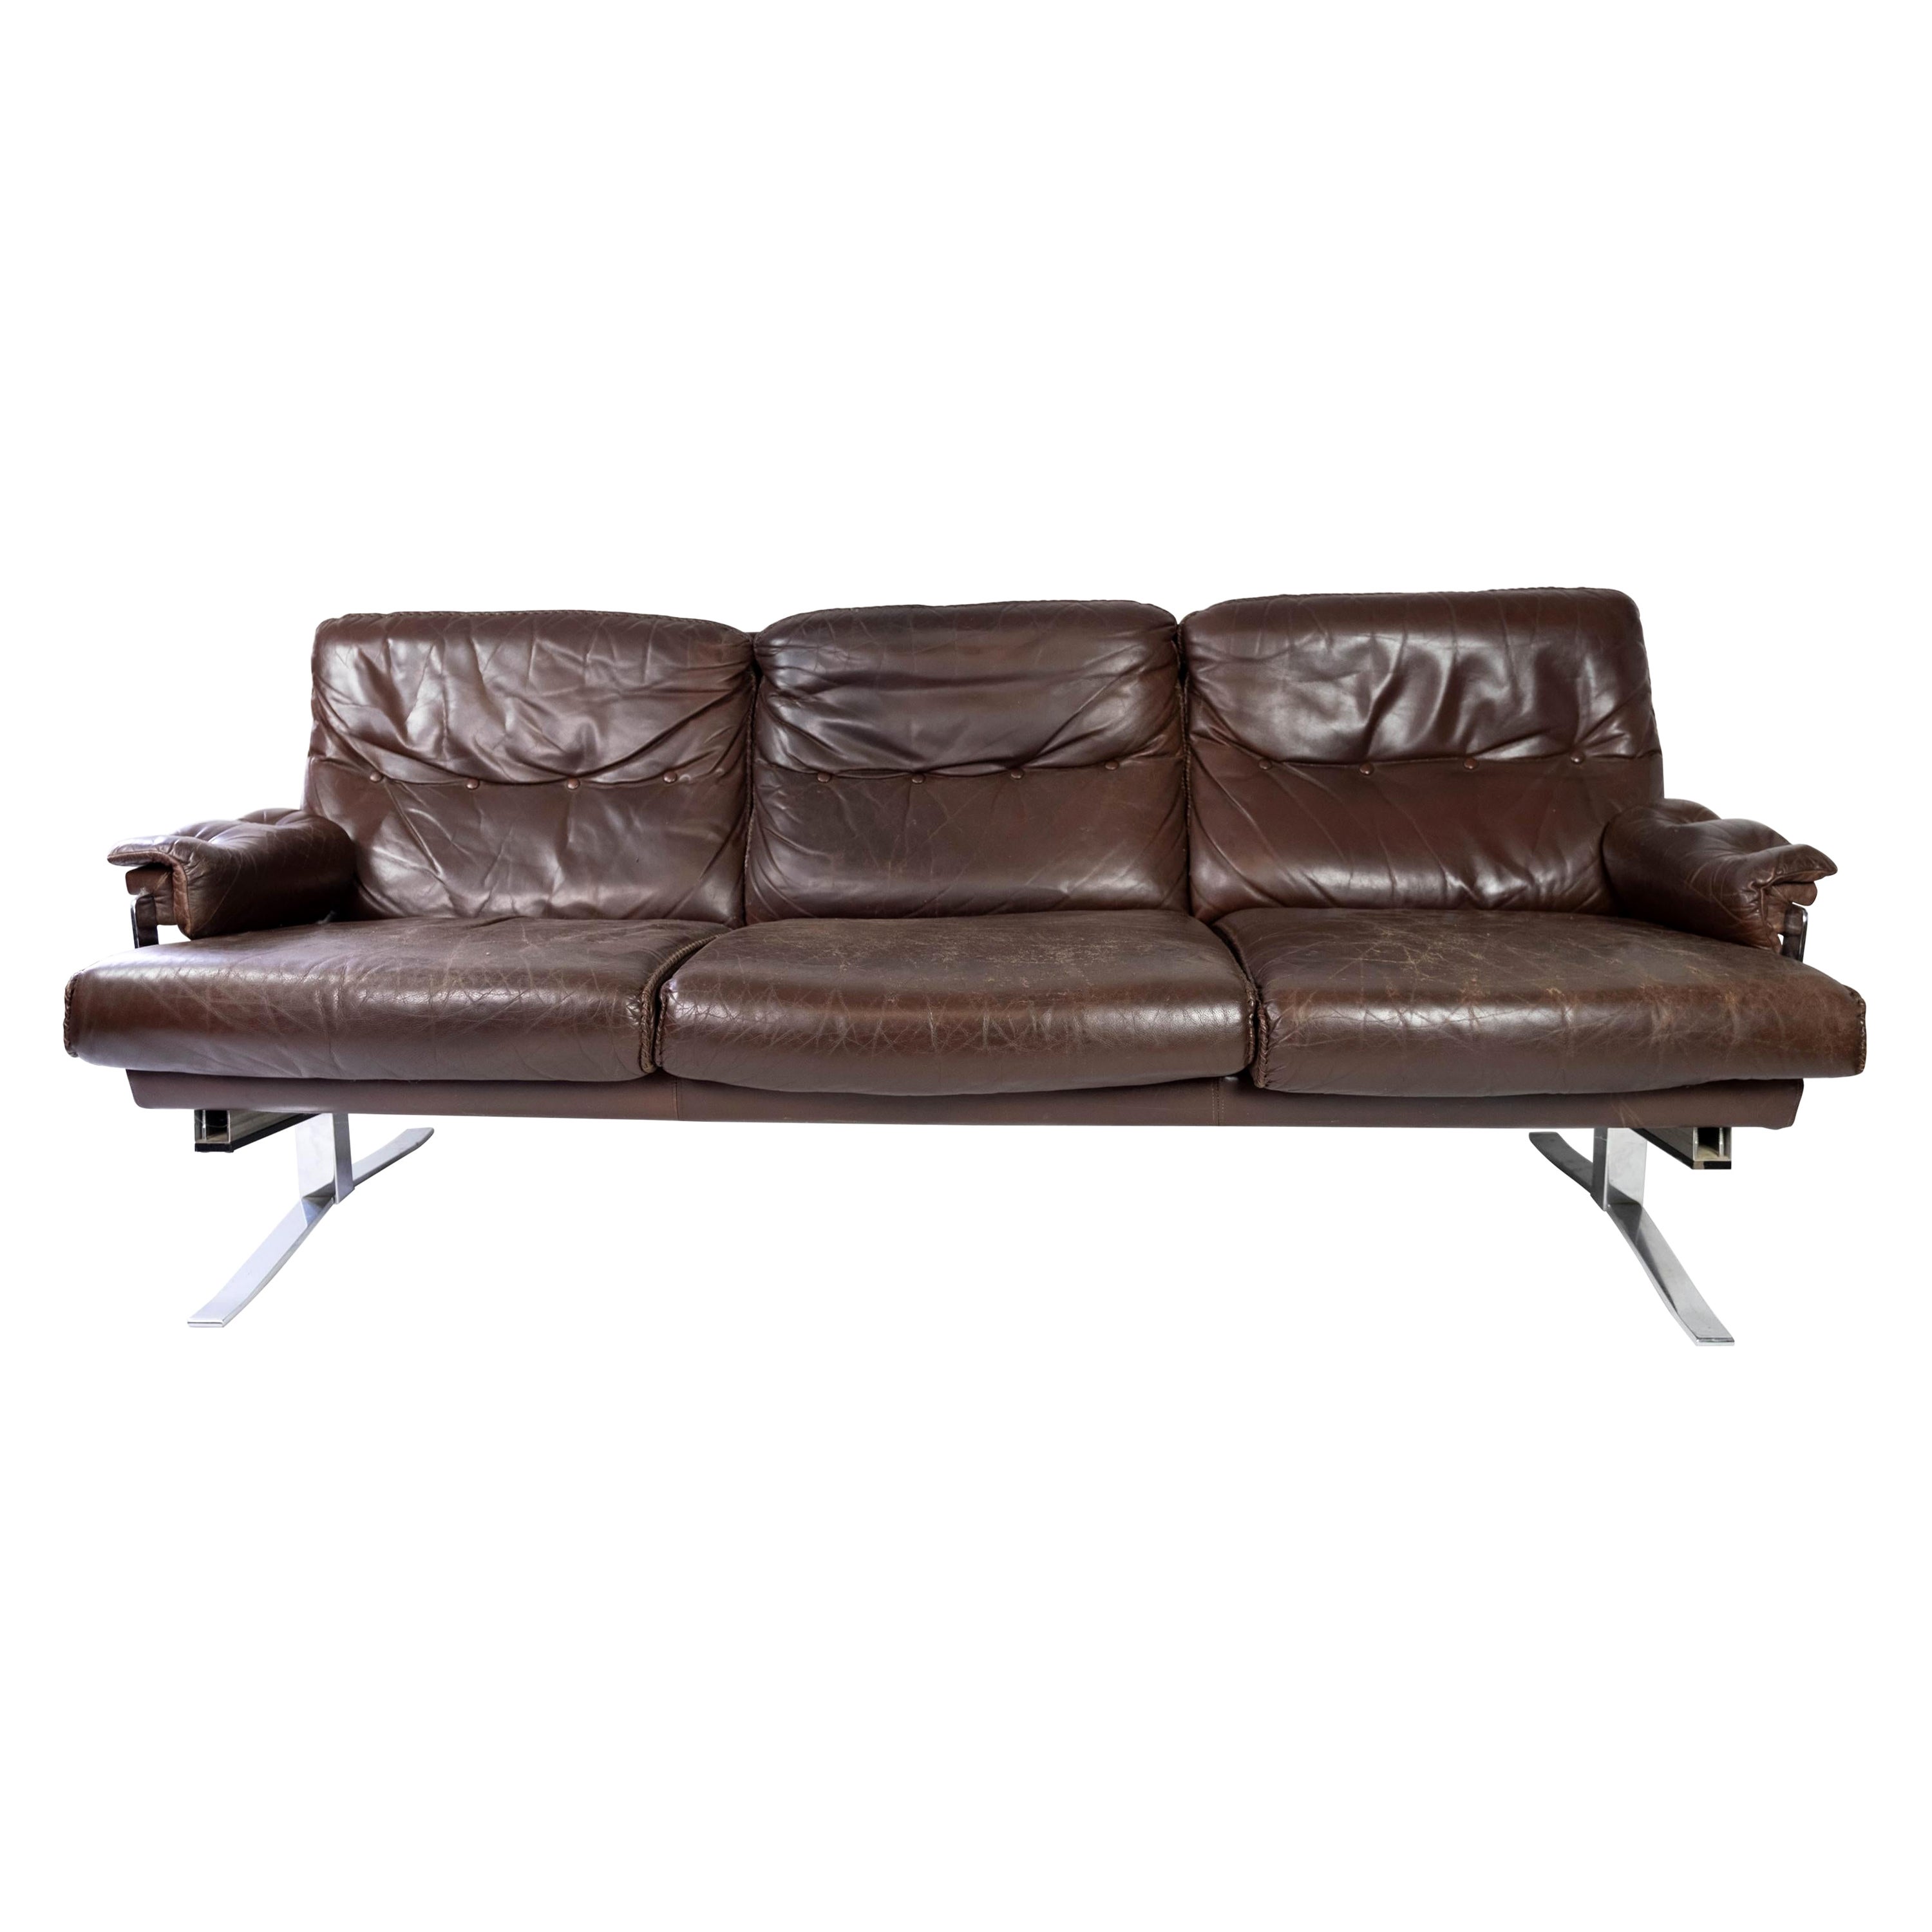 3. Seater Sofa Made In Patinated Brown Leather By Arne Norell From 1970s For Sale